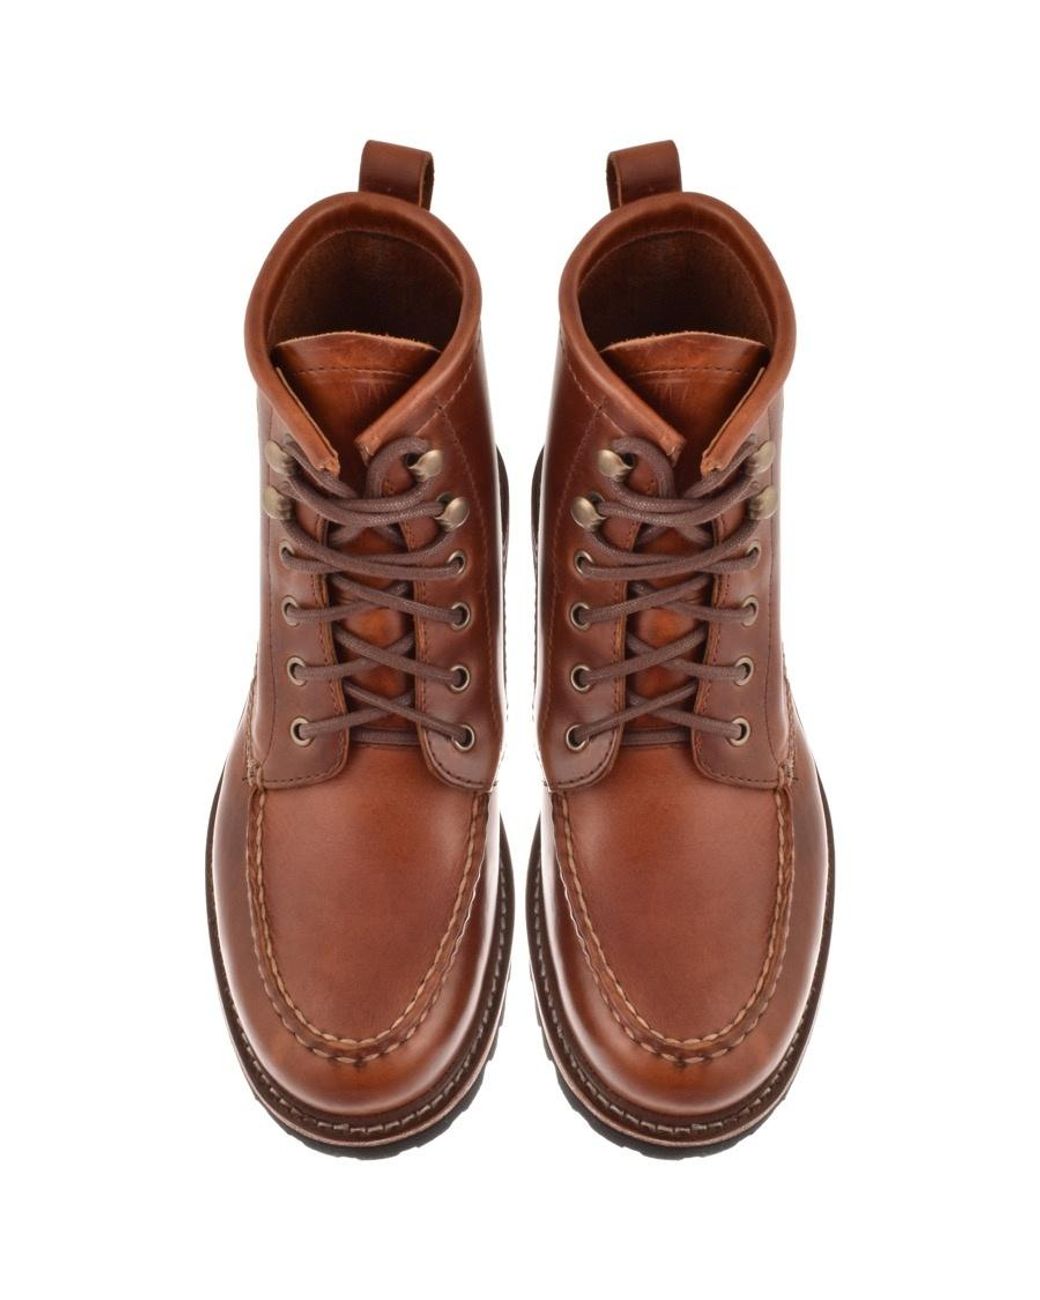 G.H.BASS SCOUT Mid Lace Boots